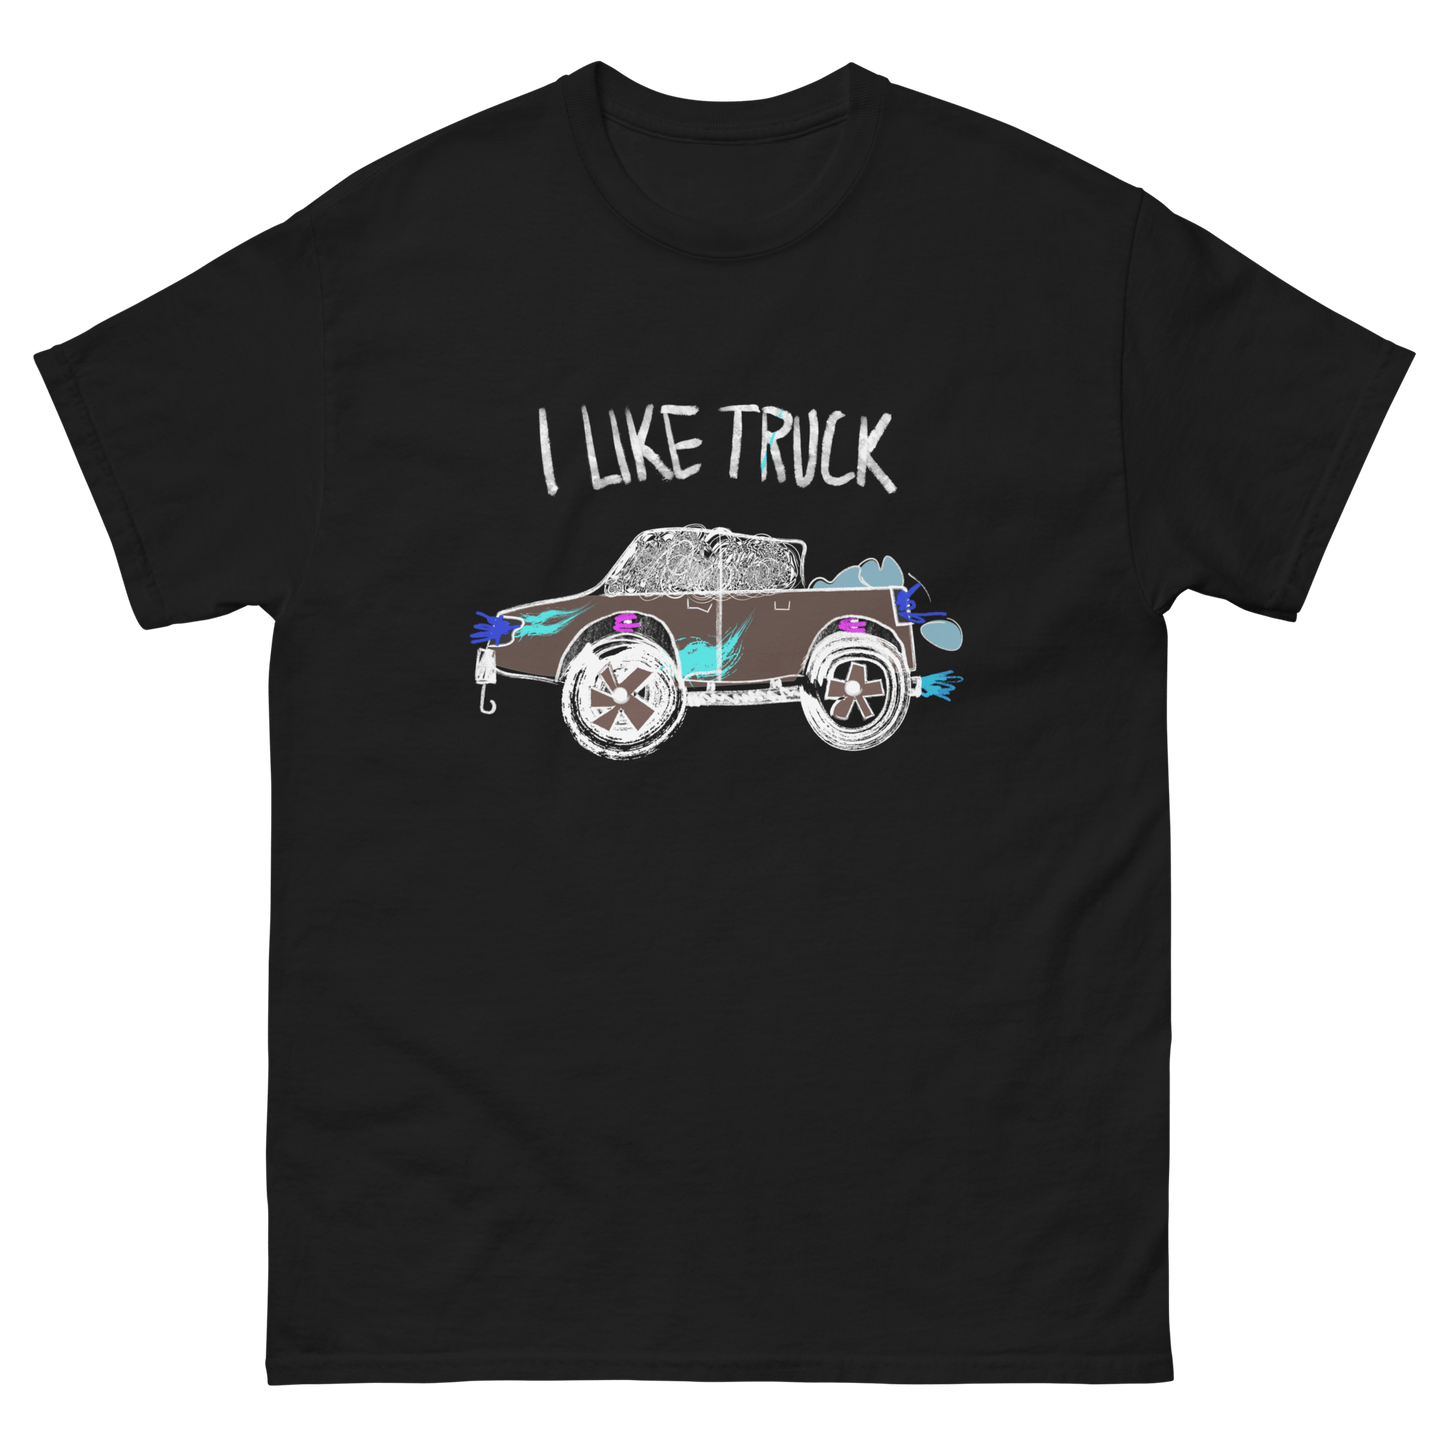 Childish Drawing Car Design T-Shirt I Like Truck - Very Expensive*